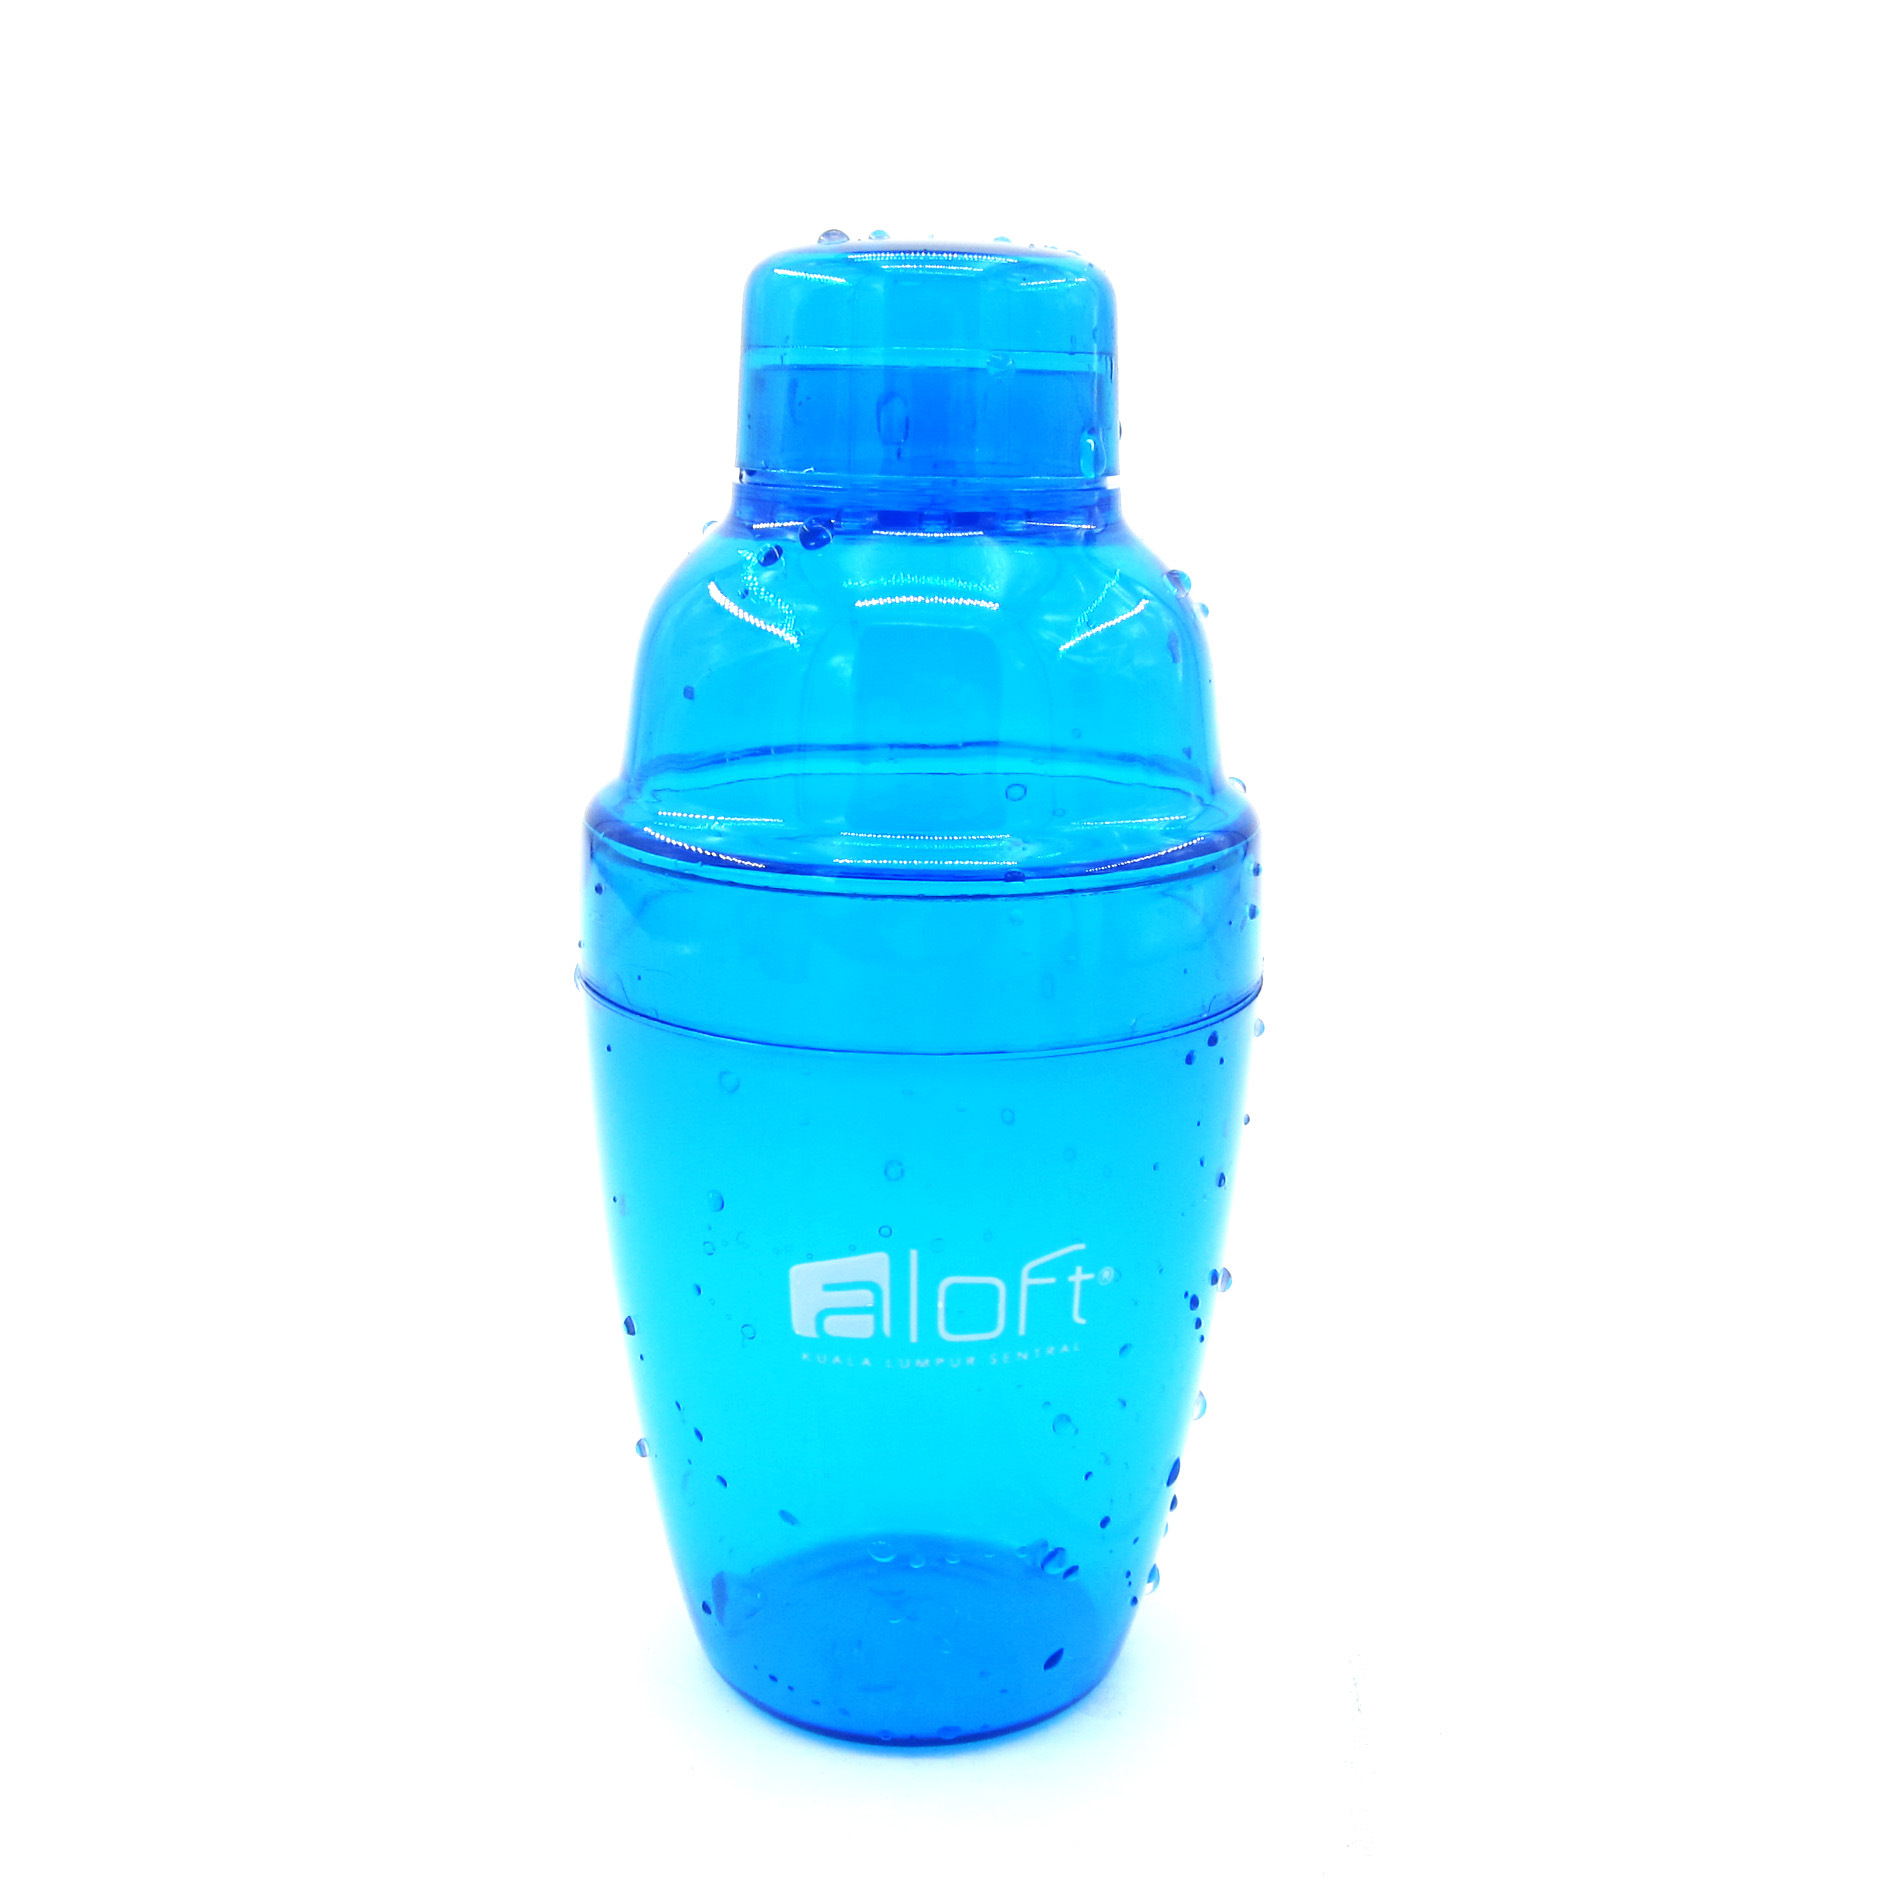 HH-0805 plastic cocktail shakers with logo printed